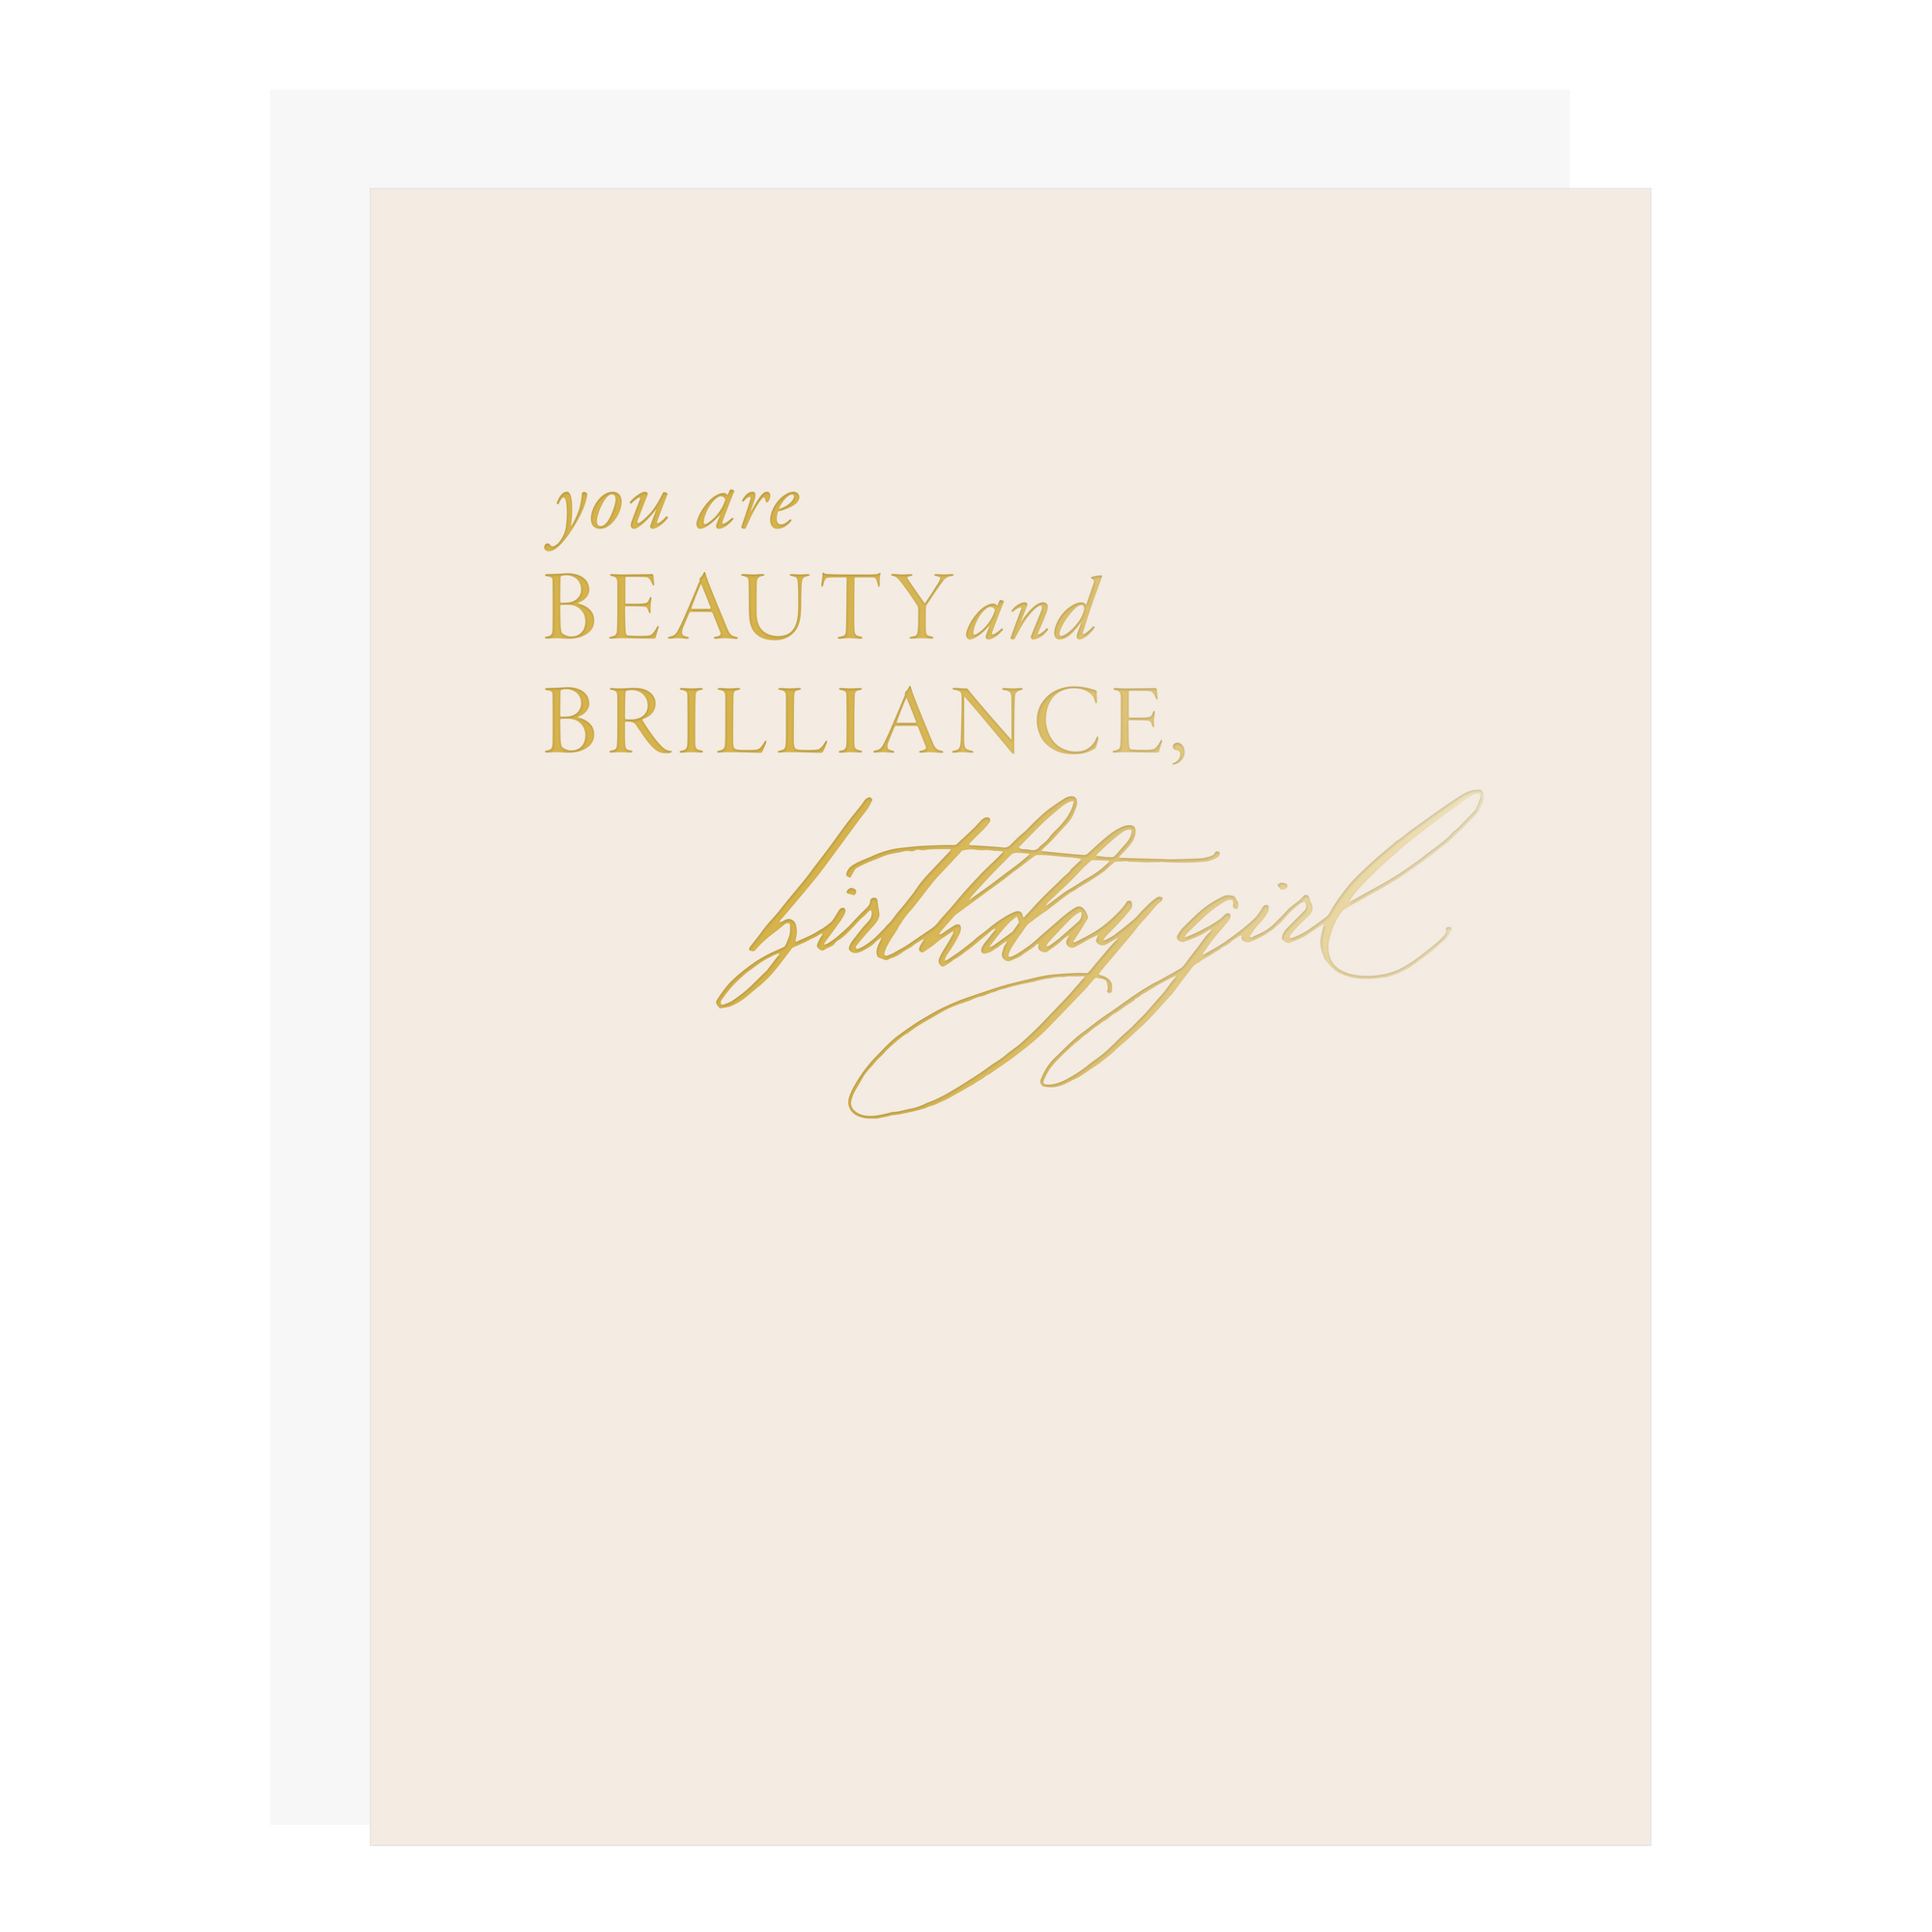 "Beauty Brilliance Birthday" card, letterpress printed by hand in gold foil.